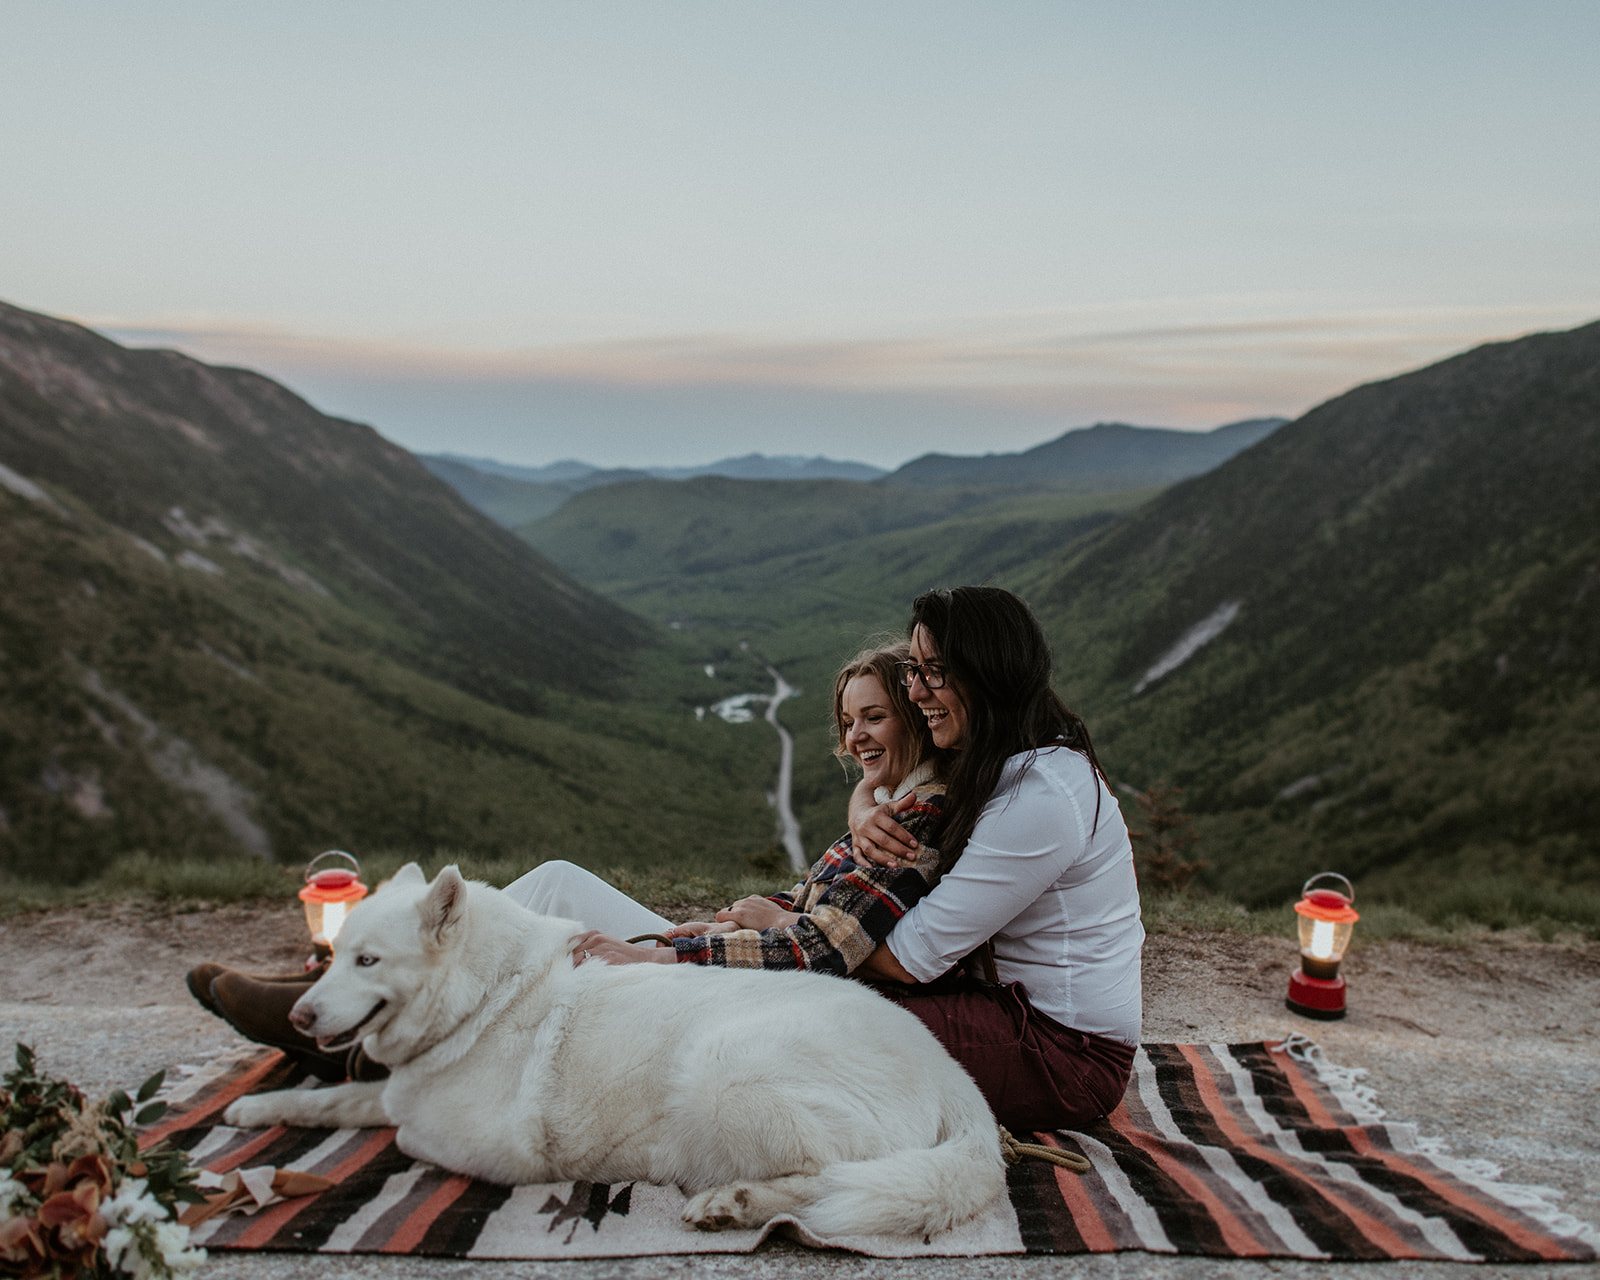 Couple sits together with their dog on blanket overlooking Crawford Notch for their White Mountains Adventure Elopement